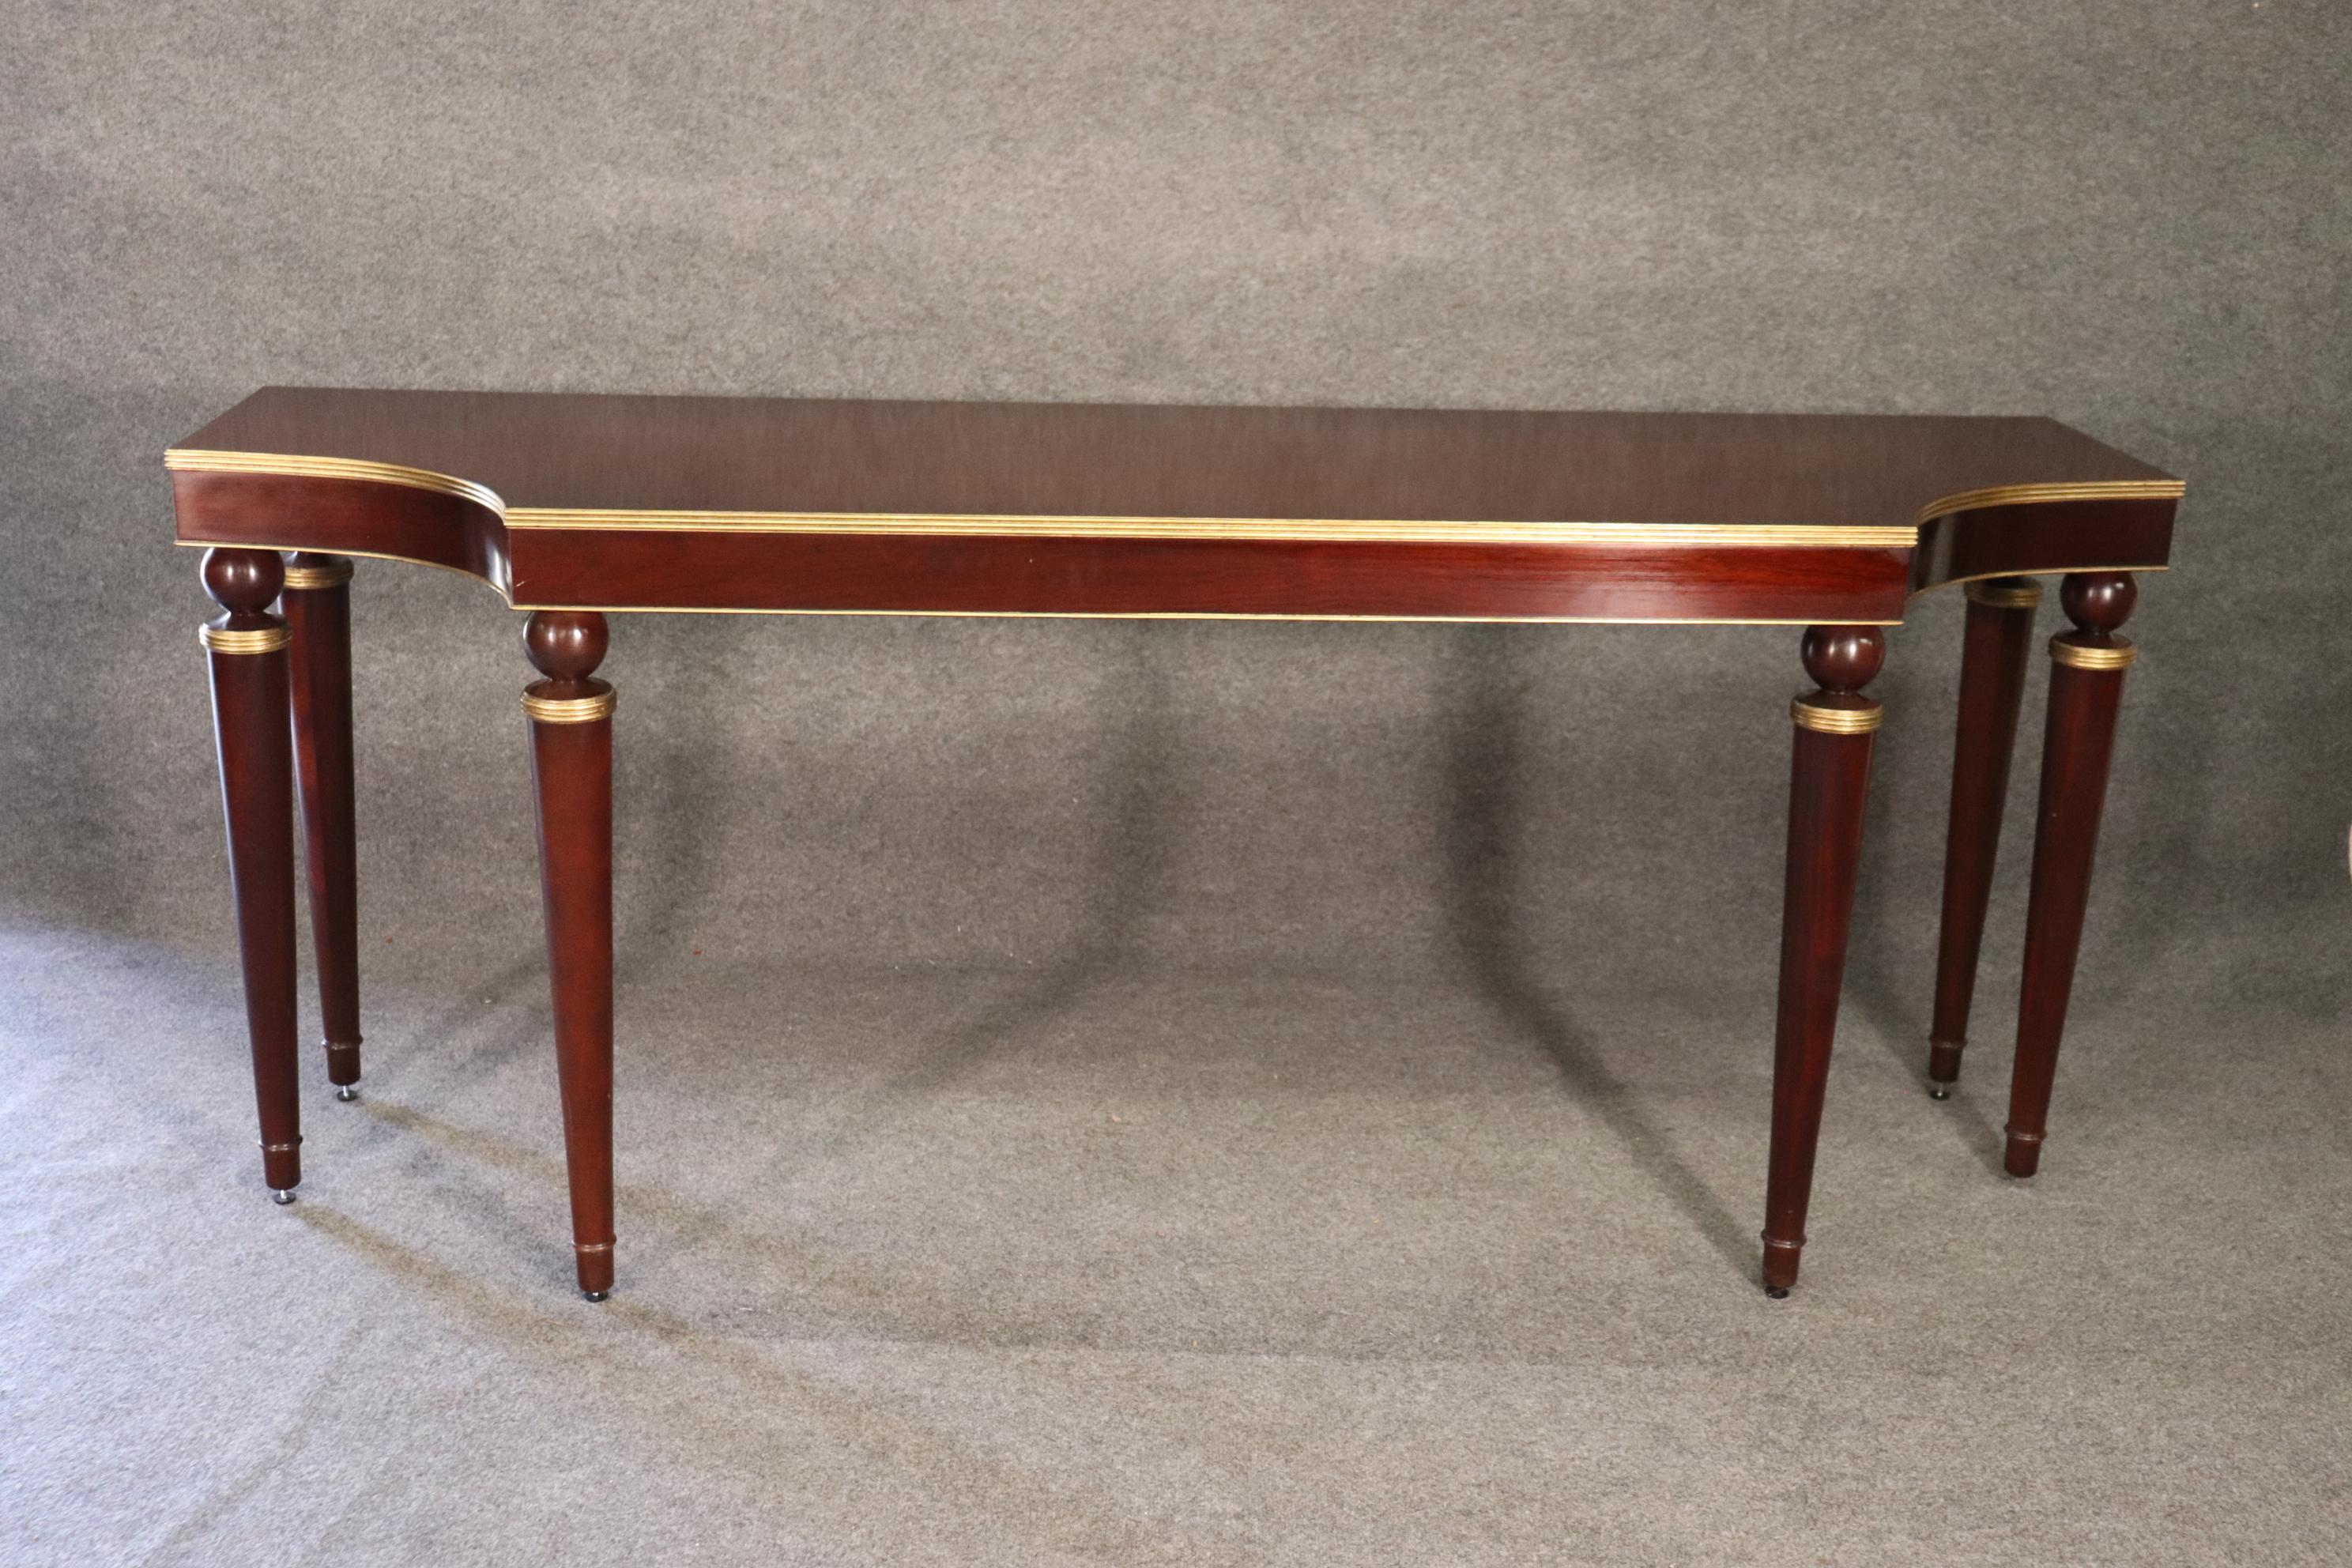 This is a gorgeous Barbara Barry for Baker furniture console or sofa table. The table is finished on both sides so ity is a true sofa table. The table is in very good condition and measures 84 inches long x 24 inches deep x 35 tall. This is truly